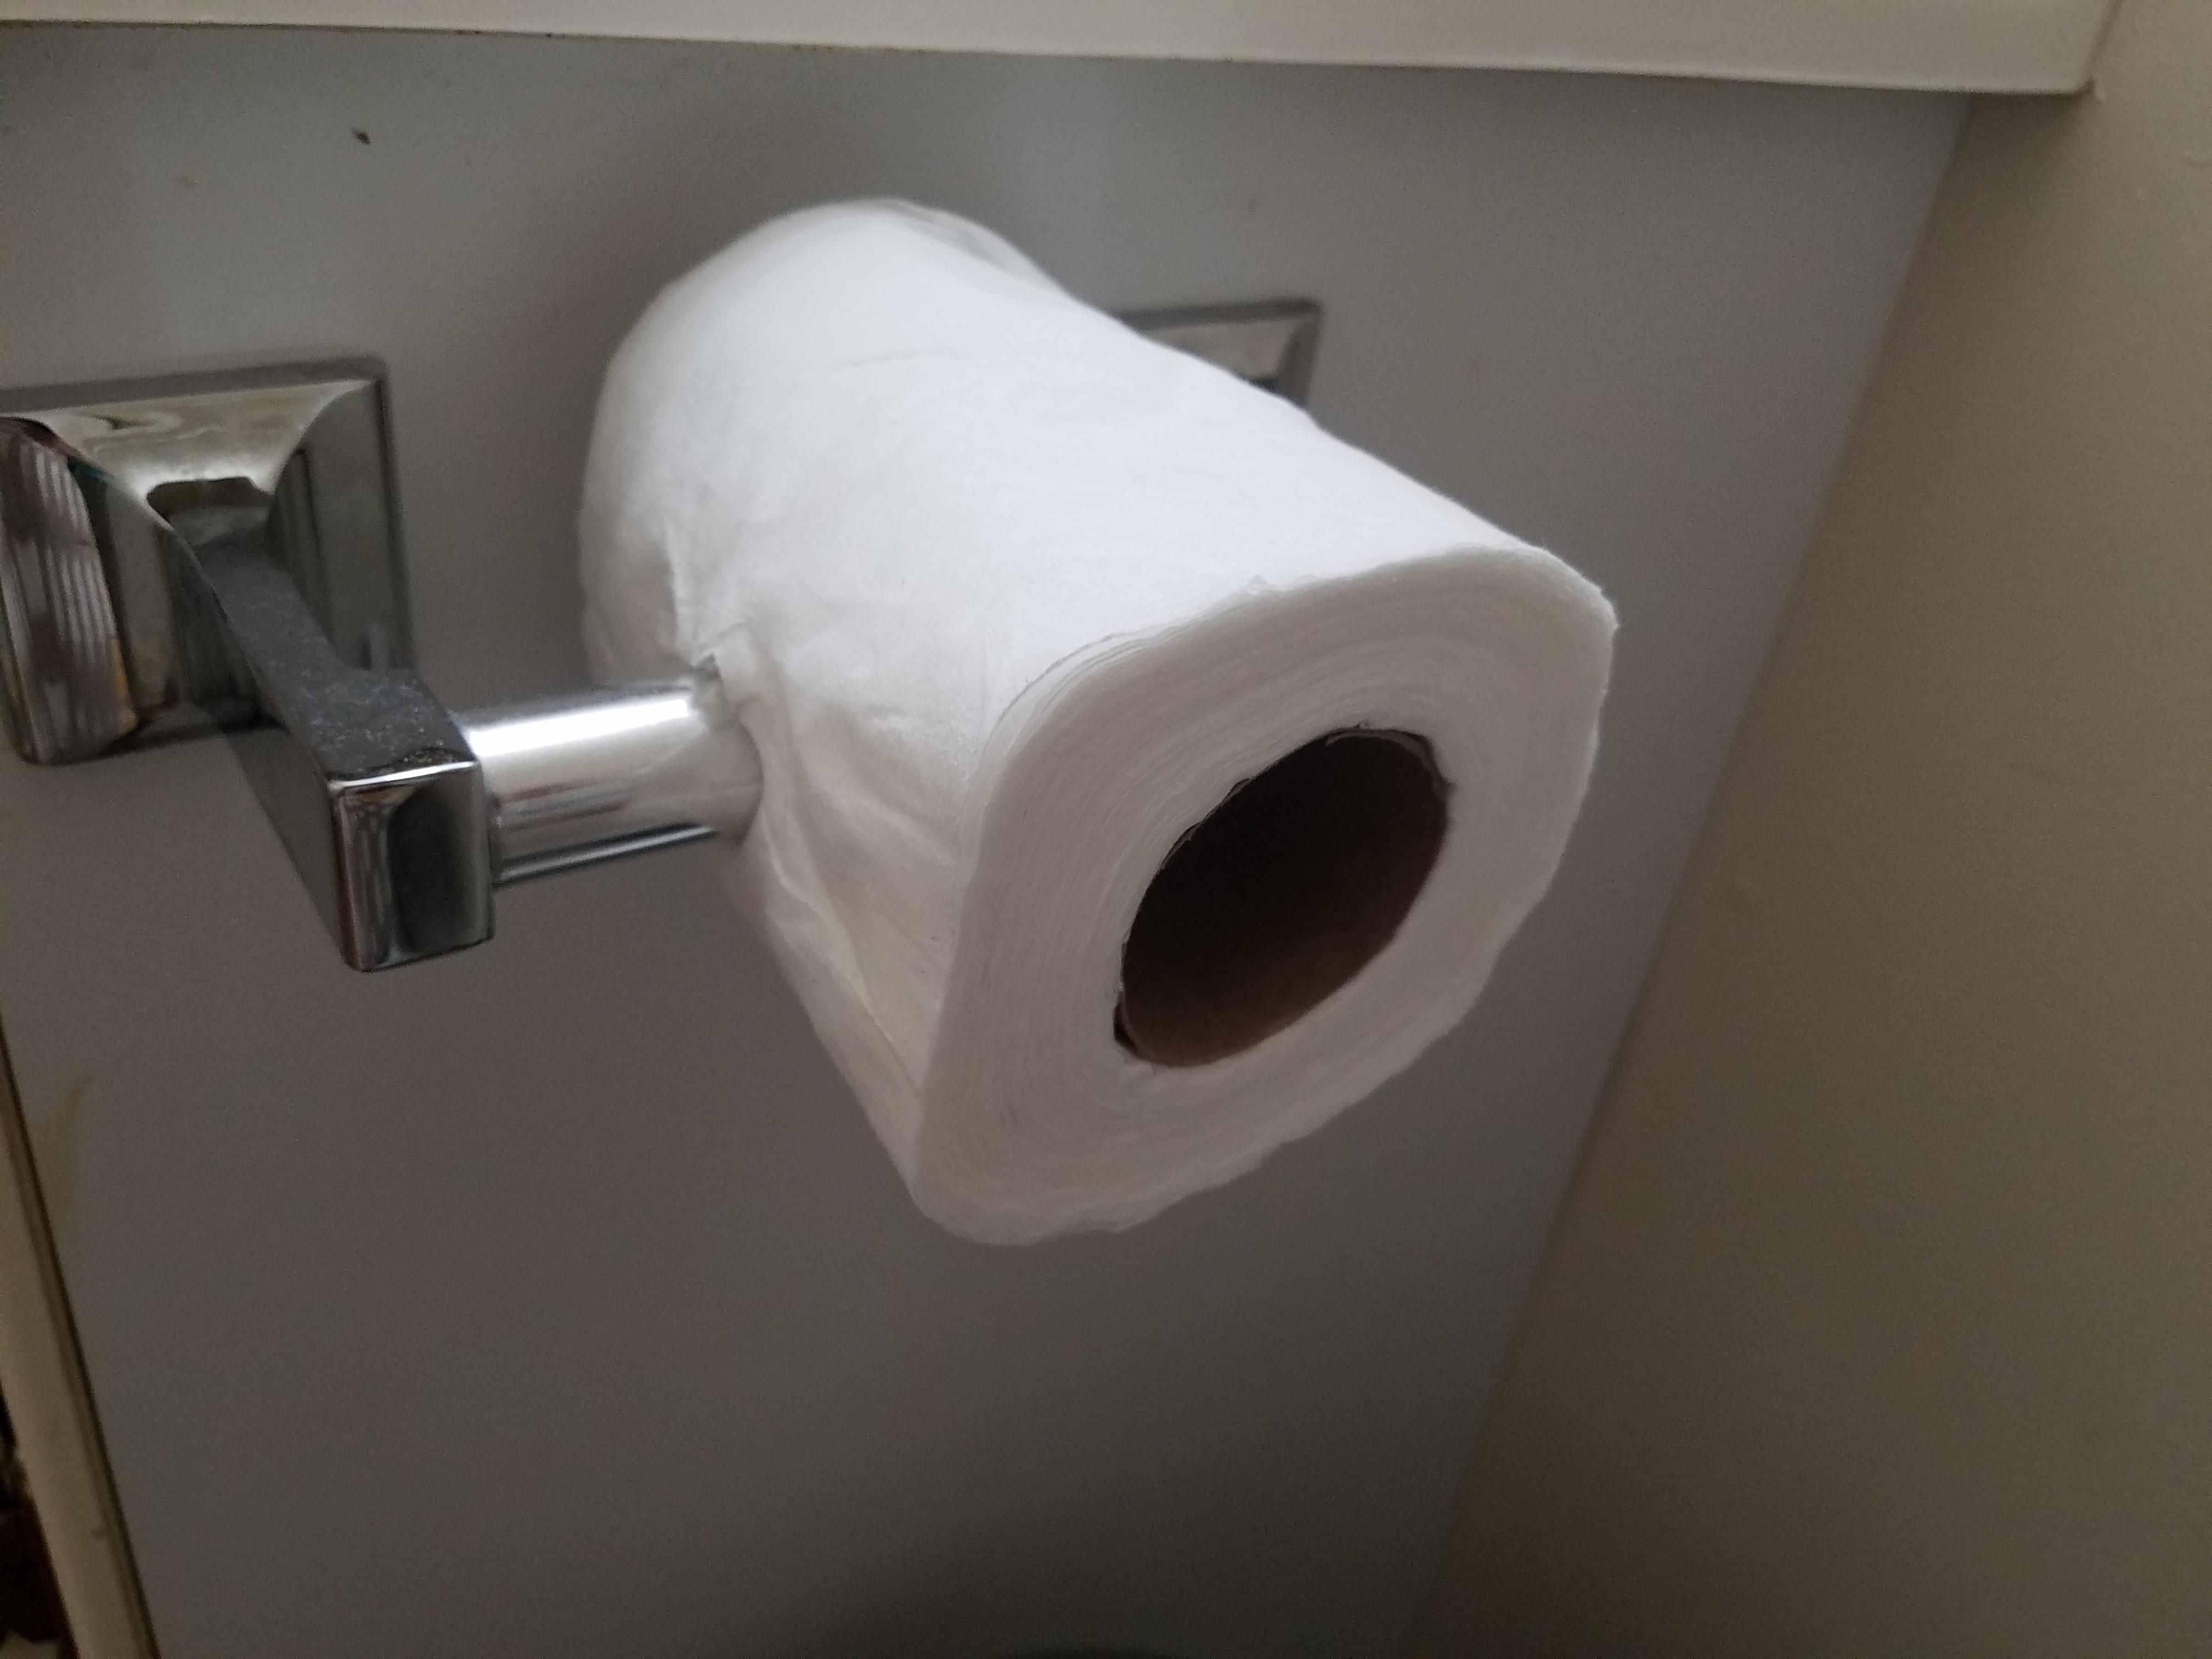 My wife keeps putting the roll on backwards. I responded.